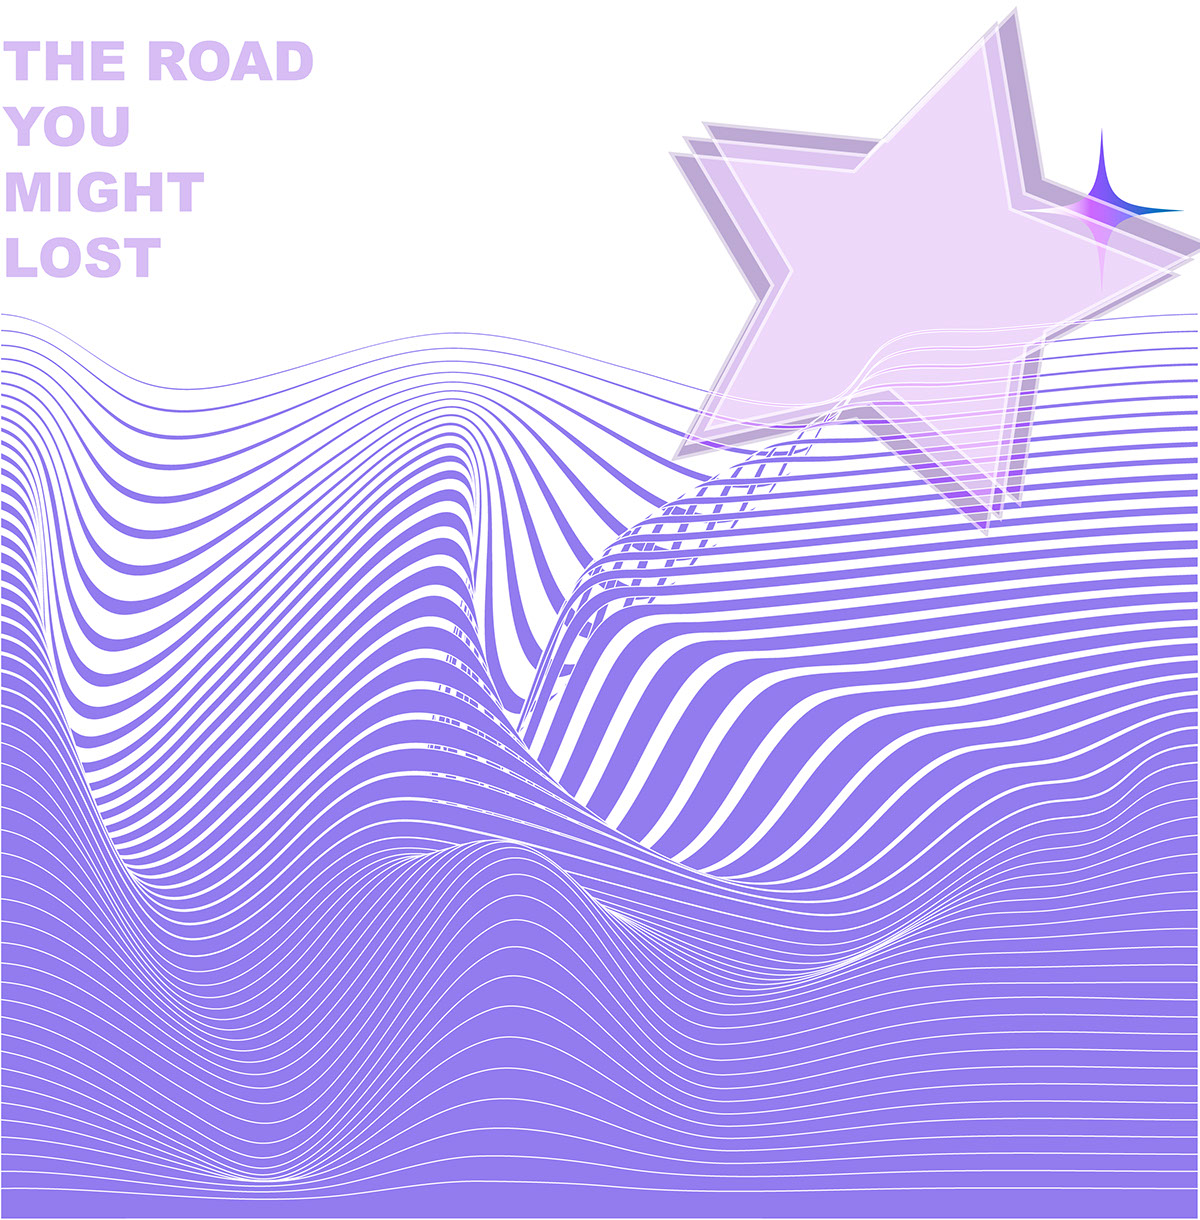 ENDLESS ROAD rendition image